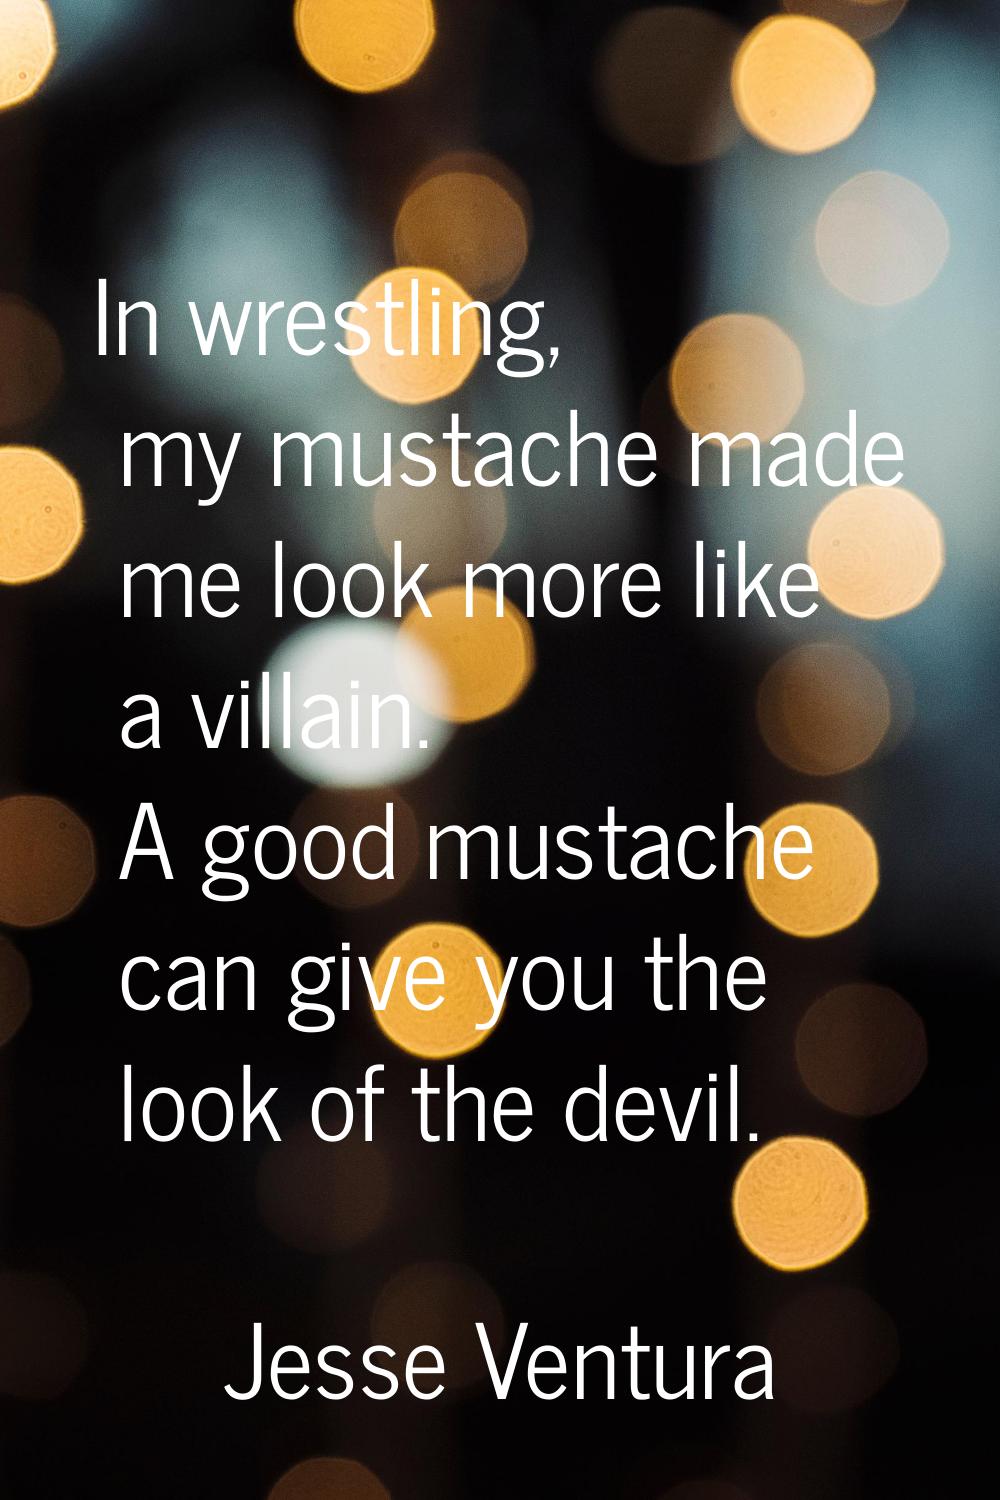 In wrestling, my mustache made me look more like a villain. A good mustache can give you the look o